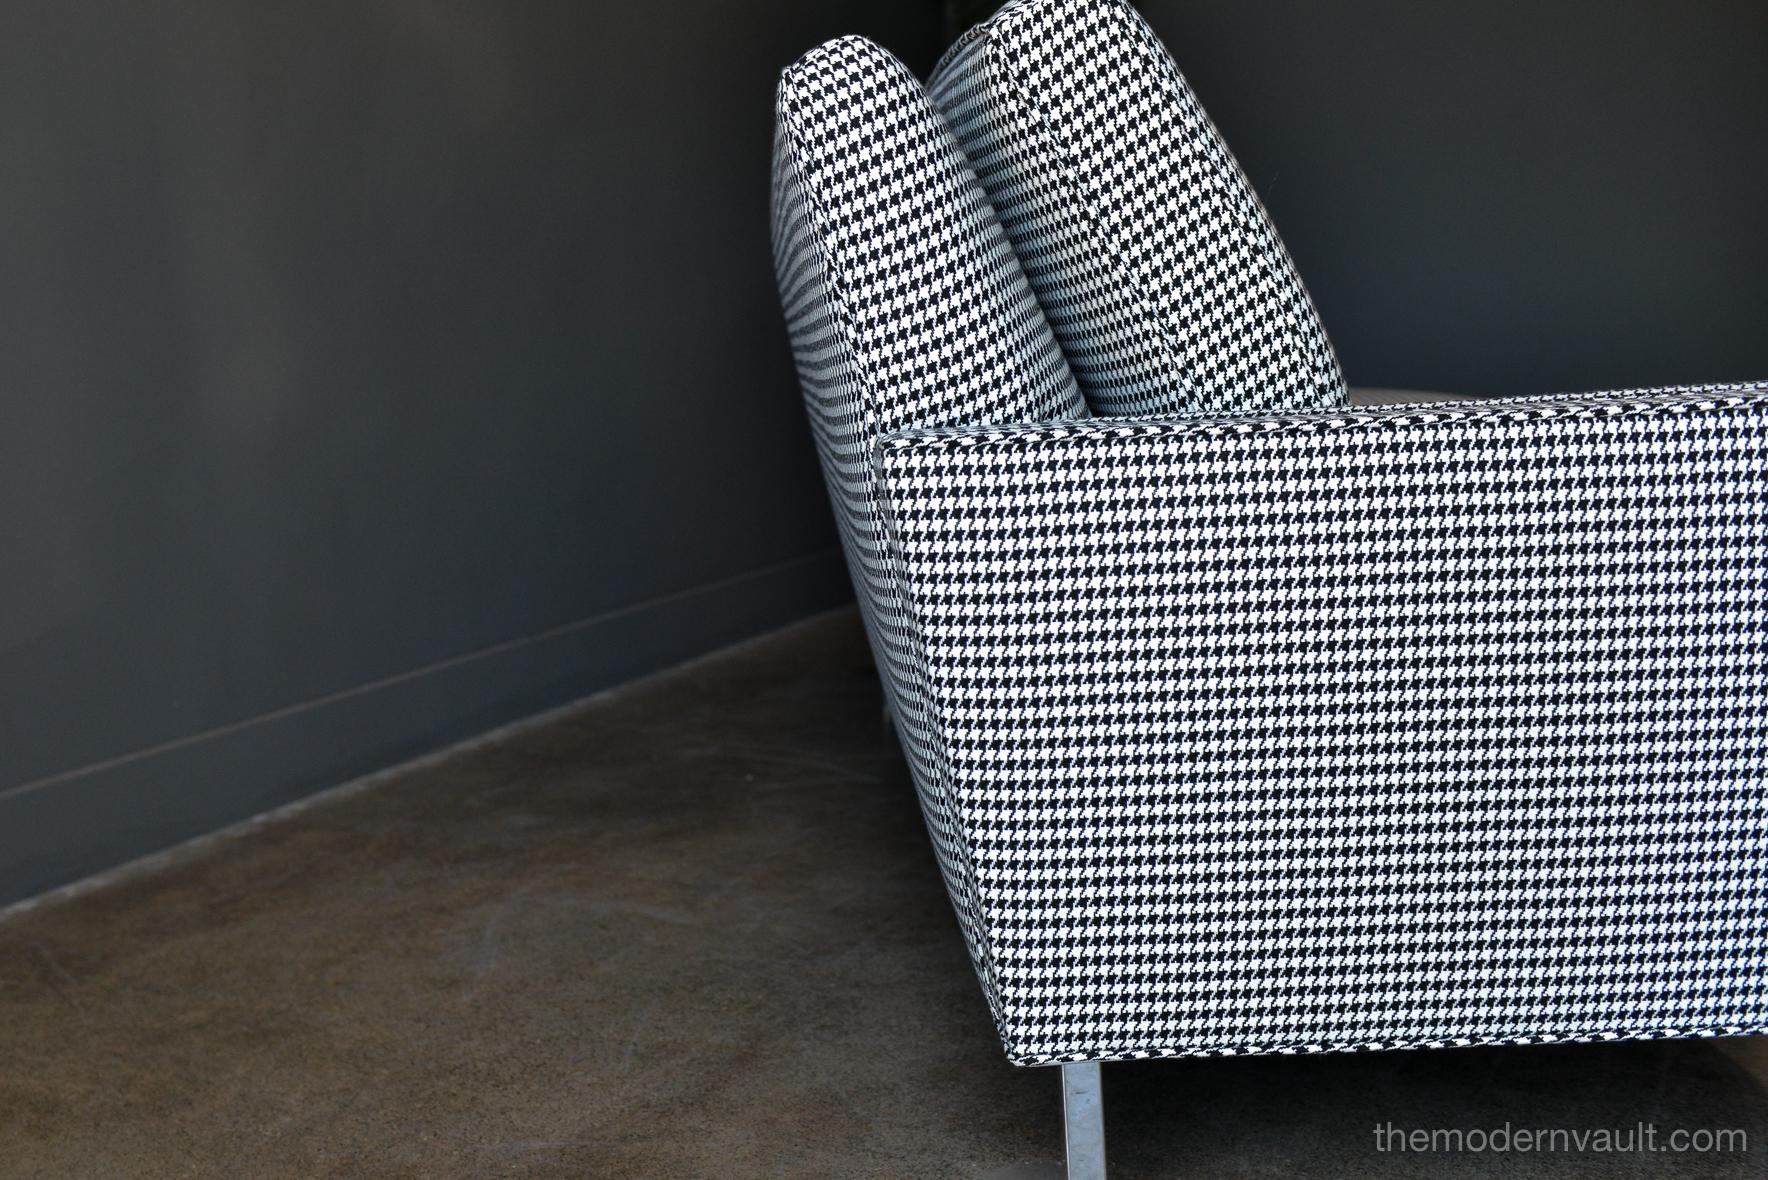 American Mid-Century Modern Sofa in Black and White Houndstooth, circa 1955